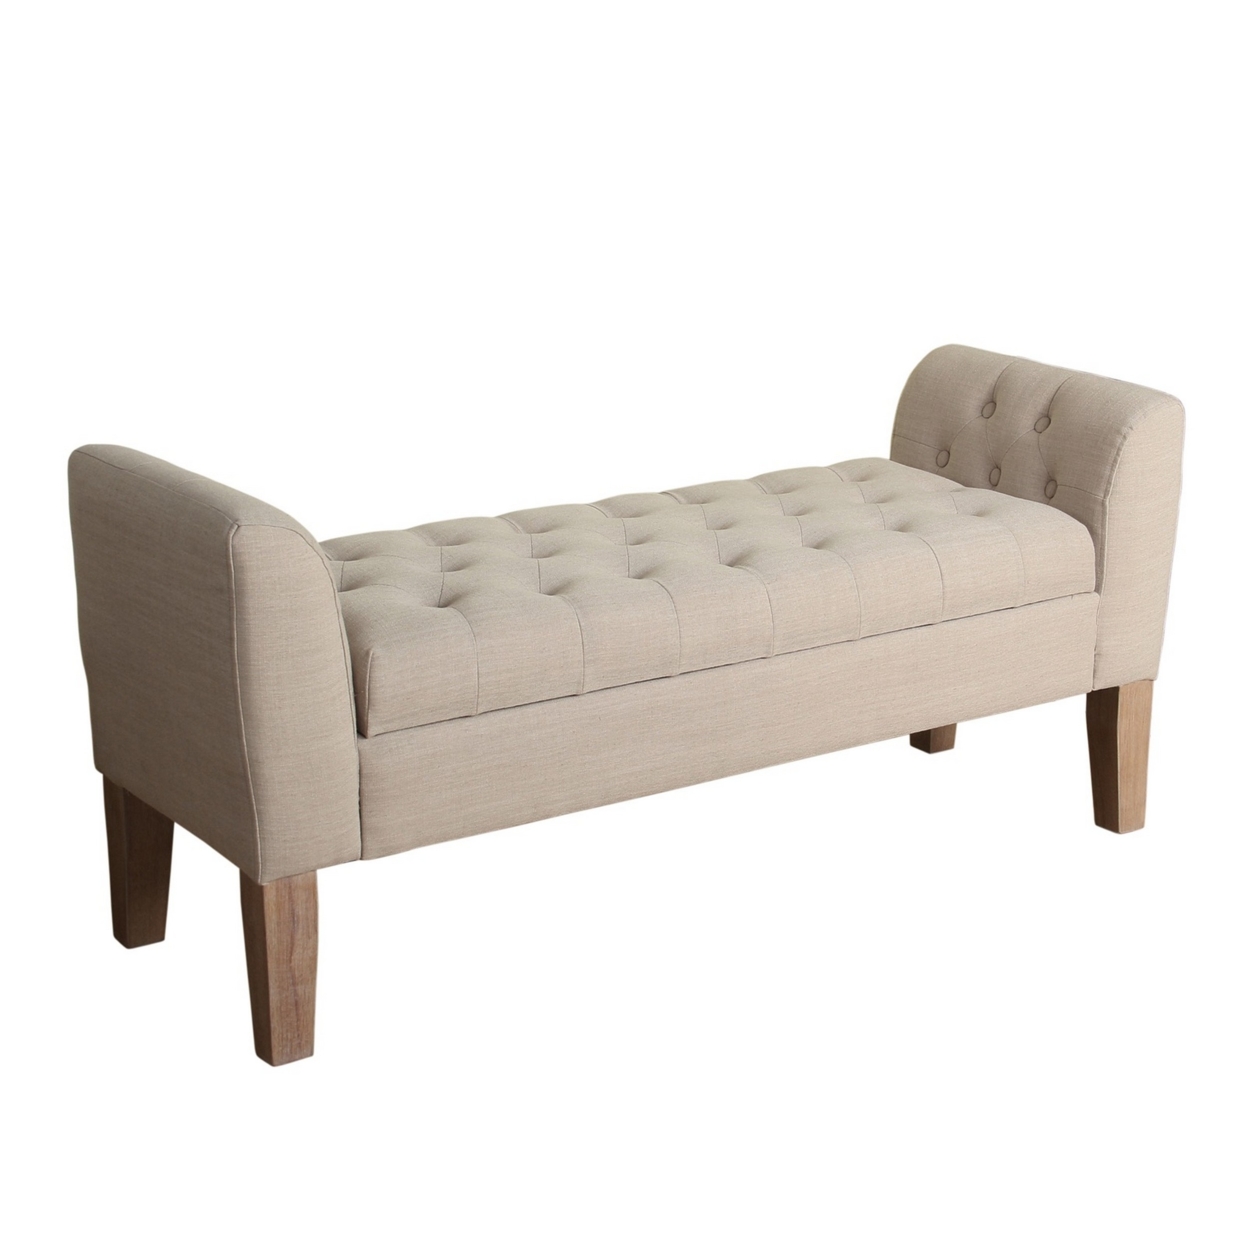 Fabric Upholstered Wooden Bench With Button Tufted Lift Top Storage, Beige- Saltoro Sherpi